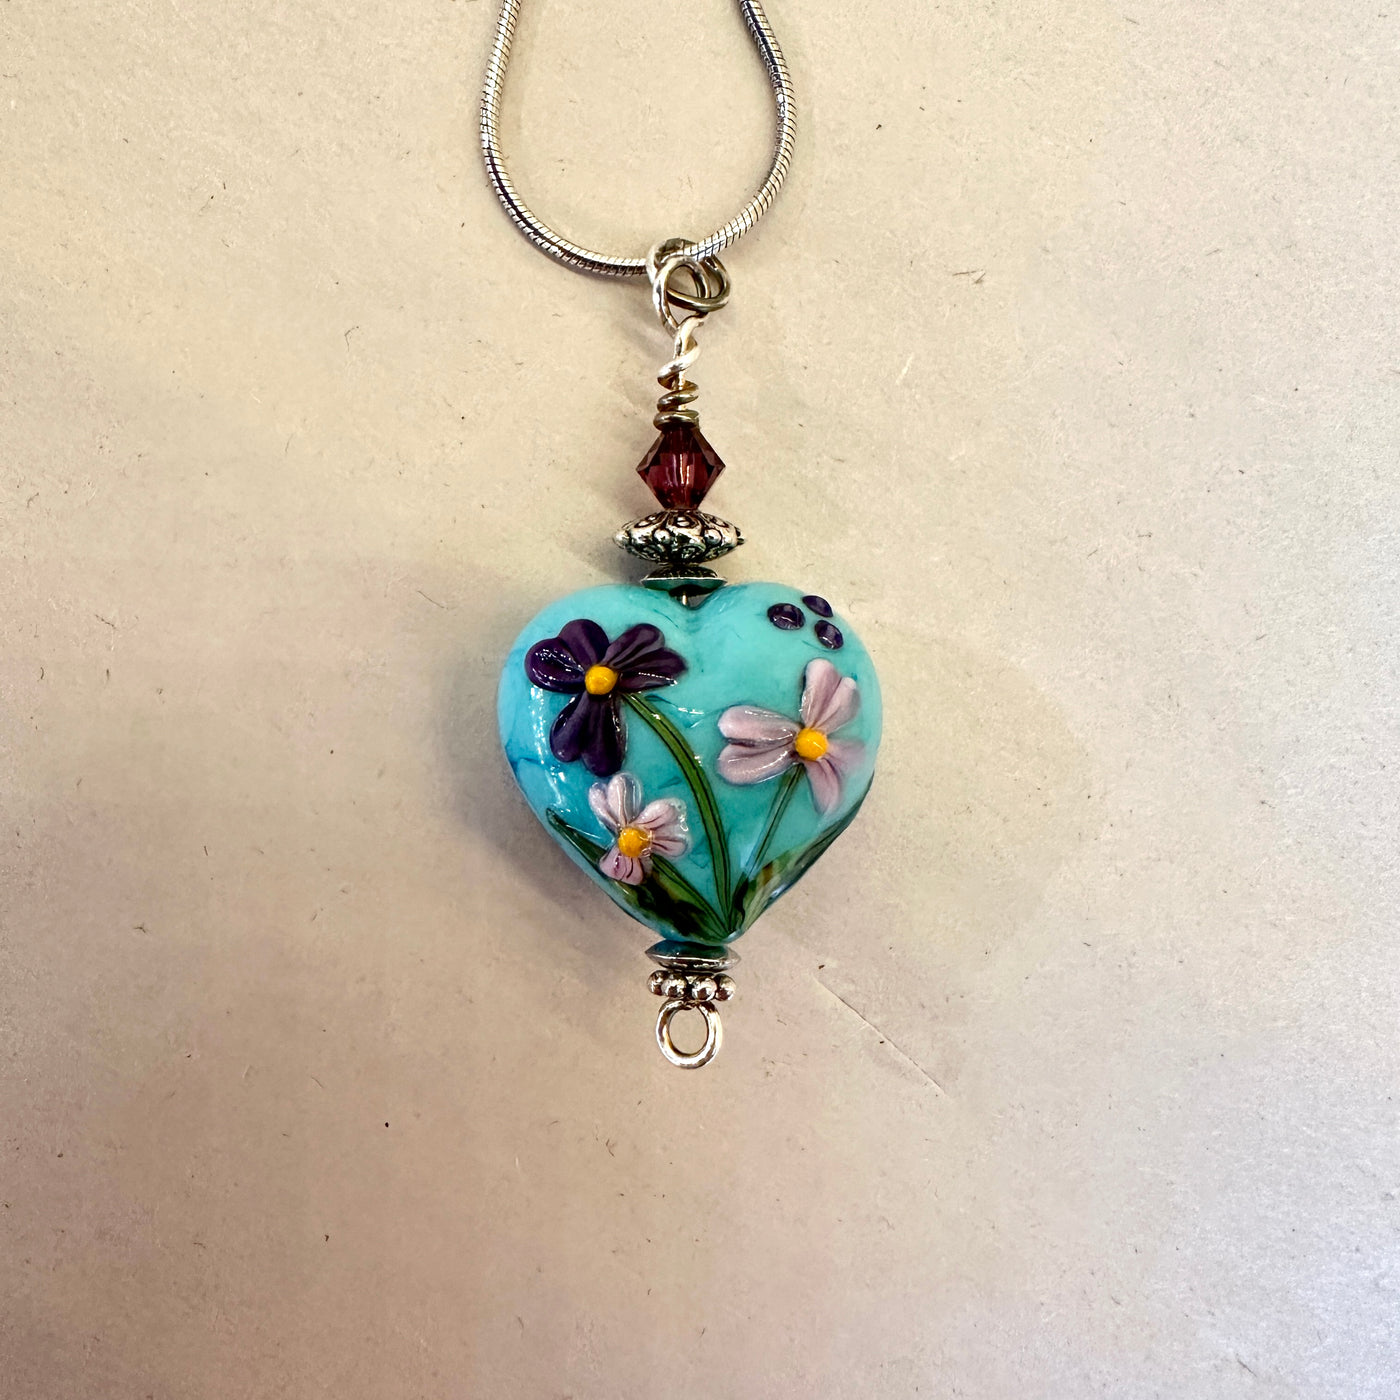 Handcrafted Heart Shaped Glass Pendant